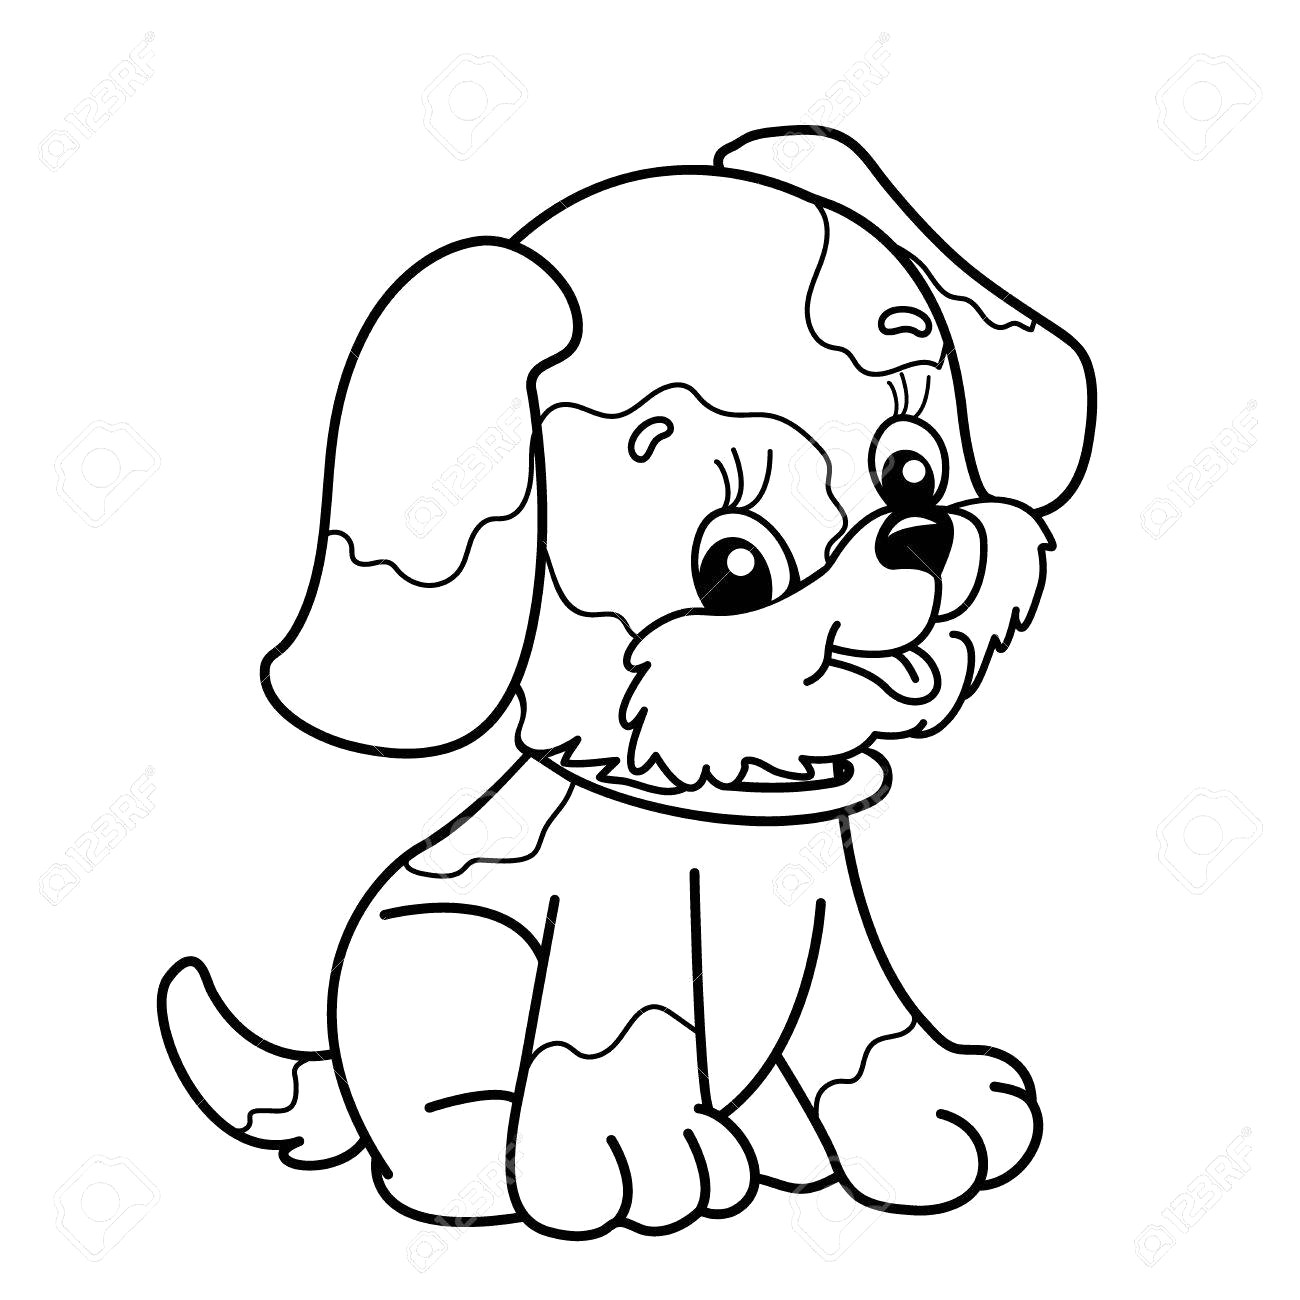 Dog Outline Drawing | Free download on ClipArtMag